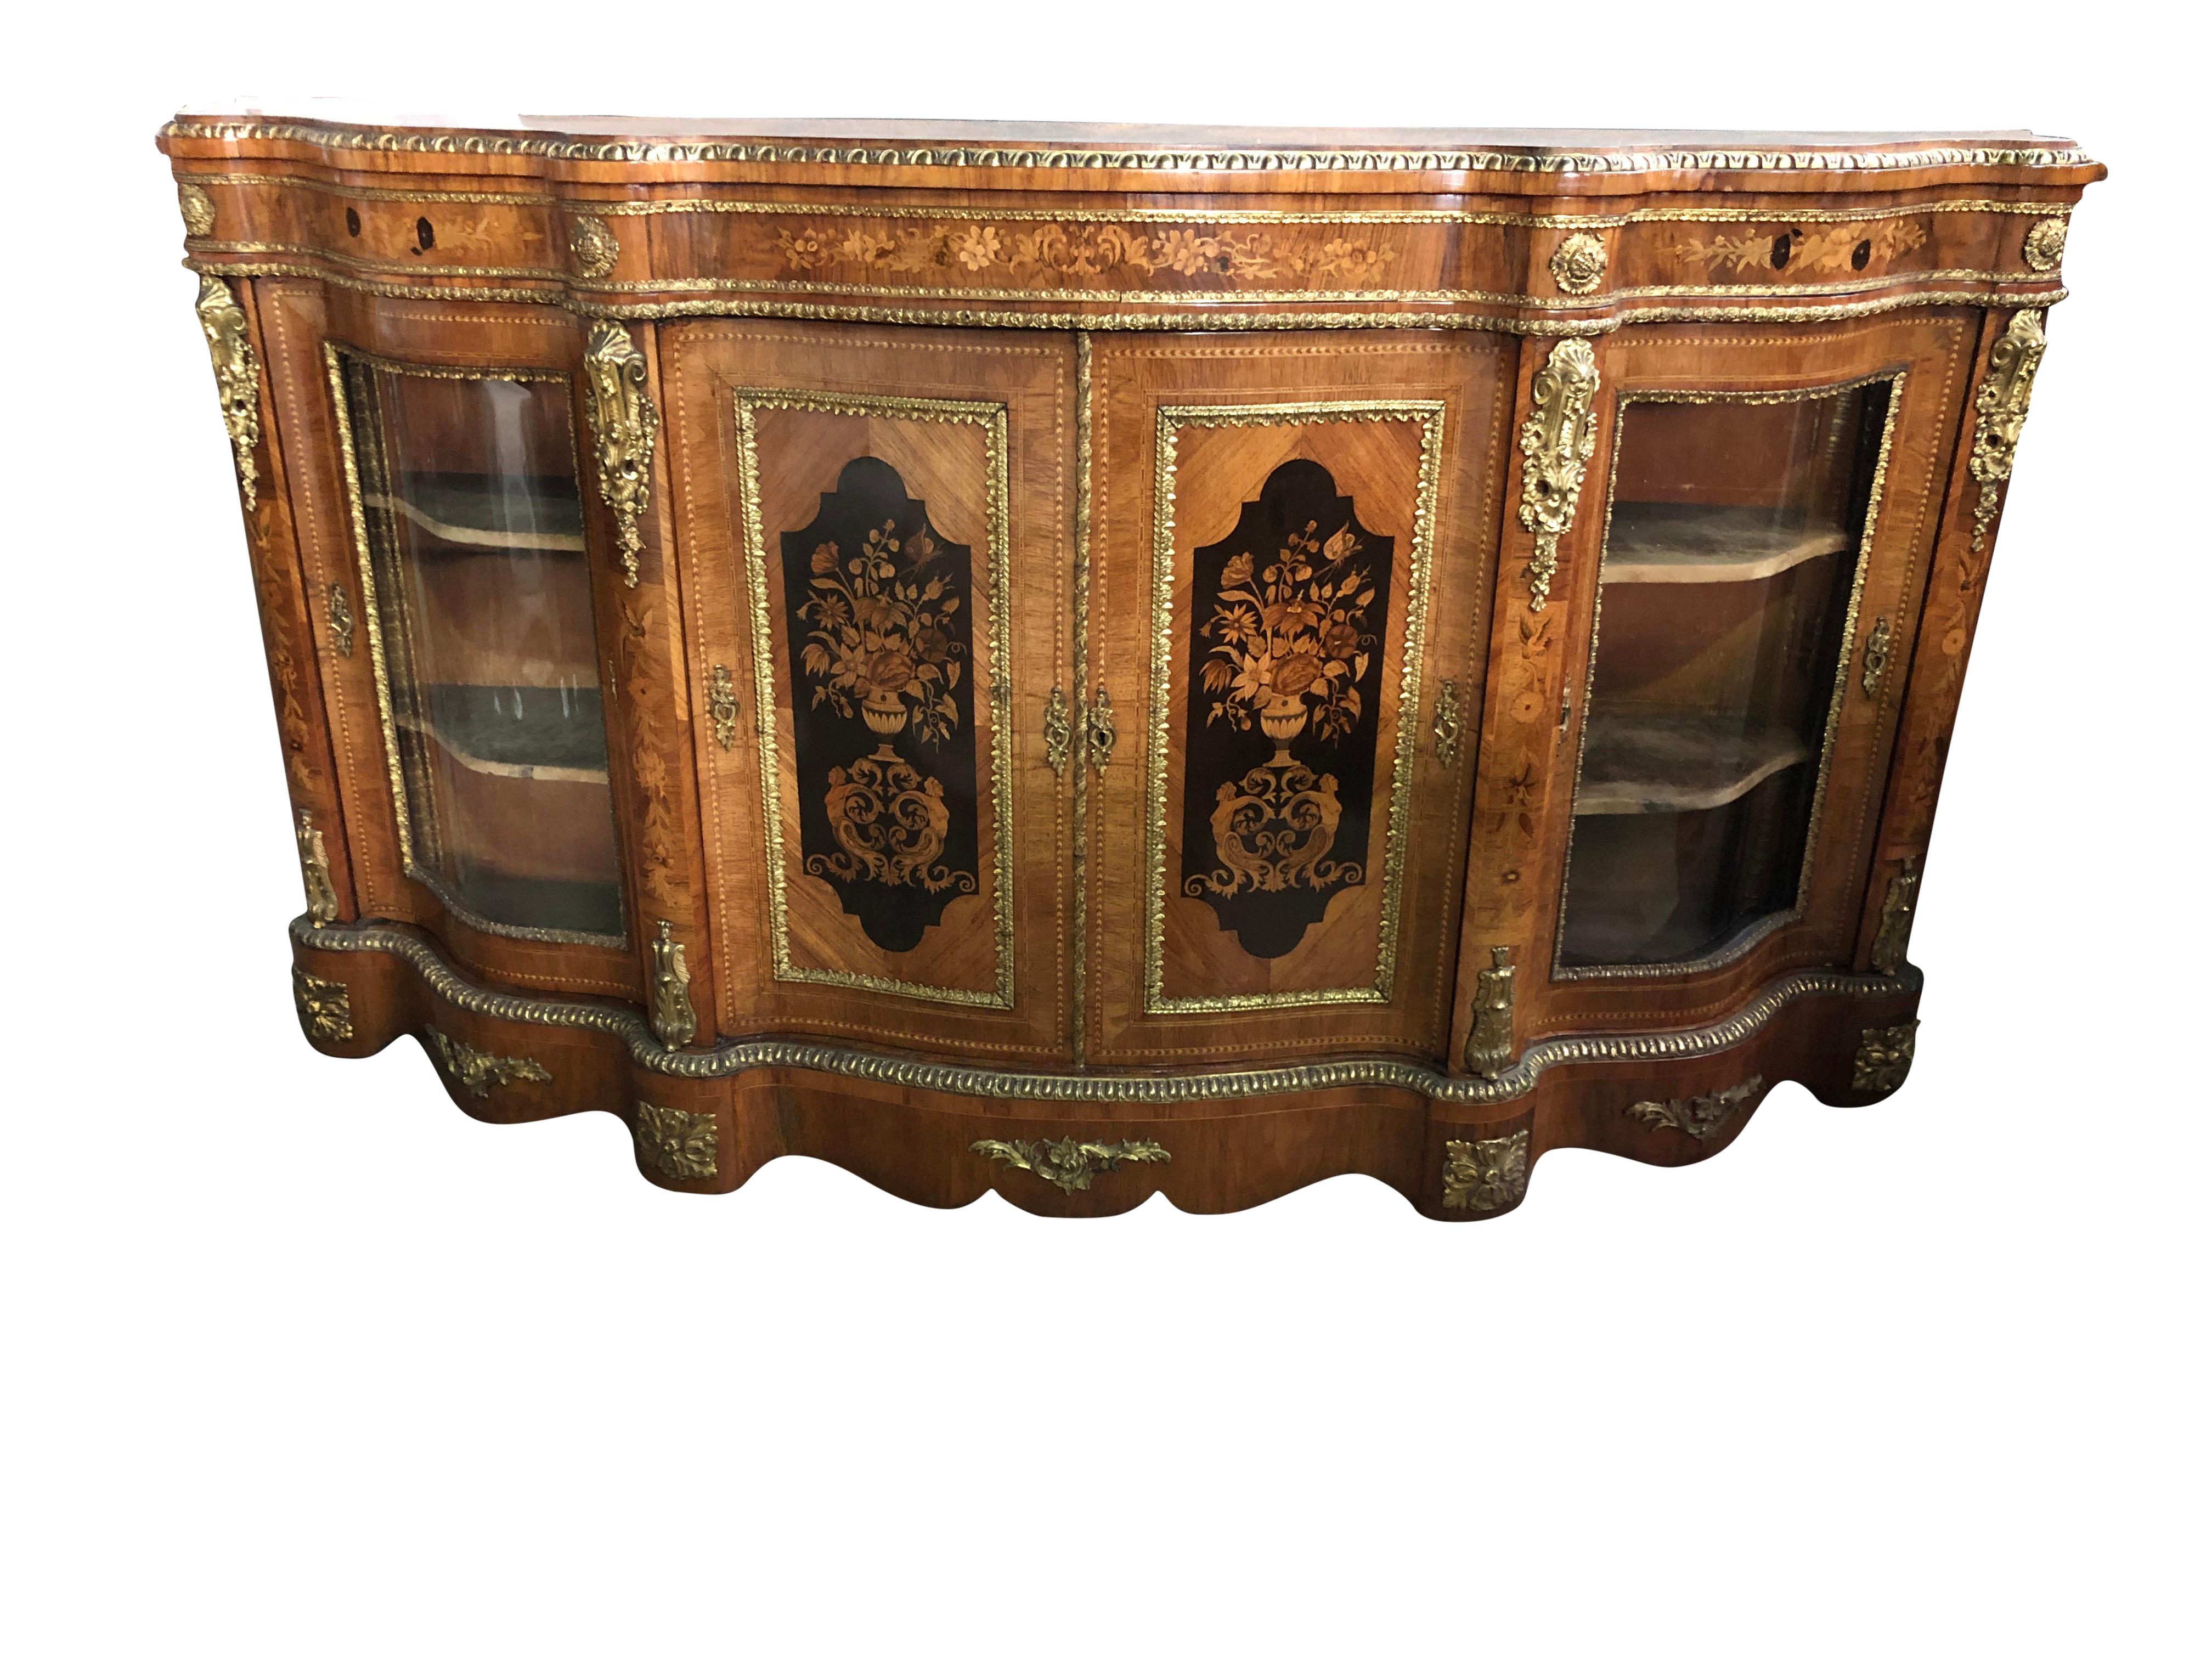 An imposing fabulous quality 19th century walnut and floral marquetry credenza of serpentine form, the wonderfully shaped top having ormolu moulding, the shaped frieze below decorated with floral marquetry and ormolu beading and carved patraes, the